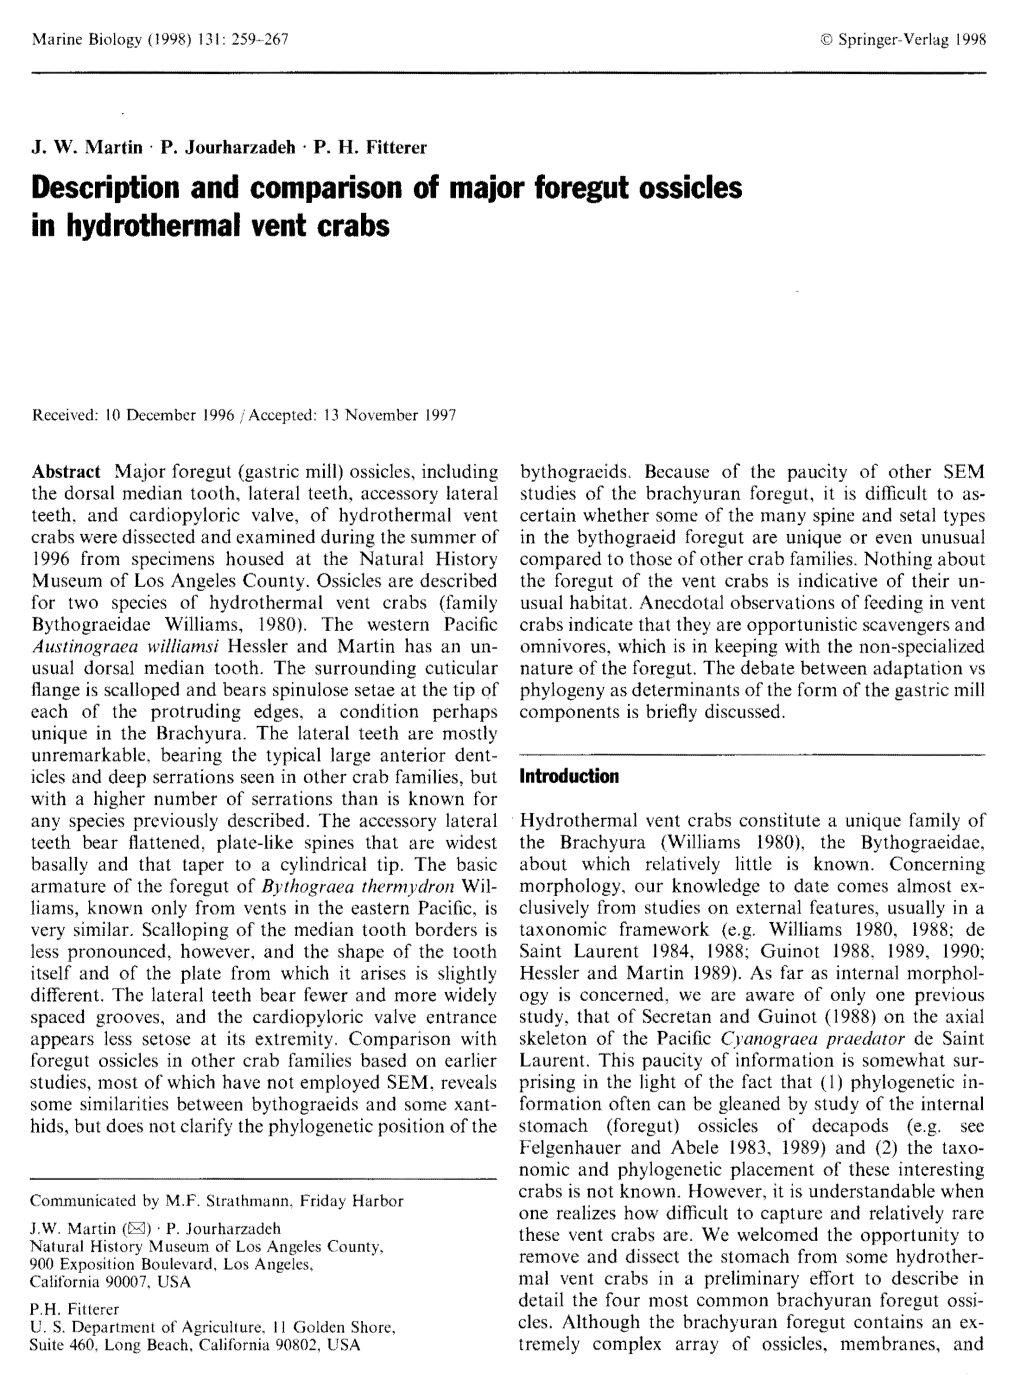 Description and Comparison of Major Foregut Ossicles in Hydrothermal Vent Crabs